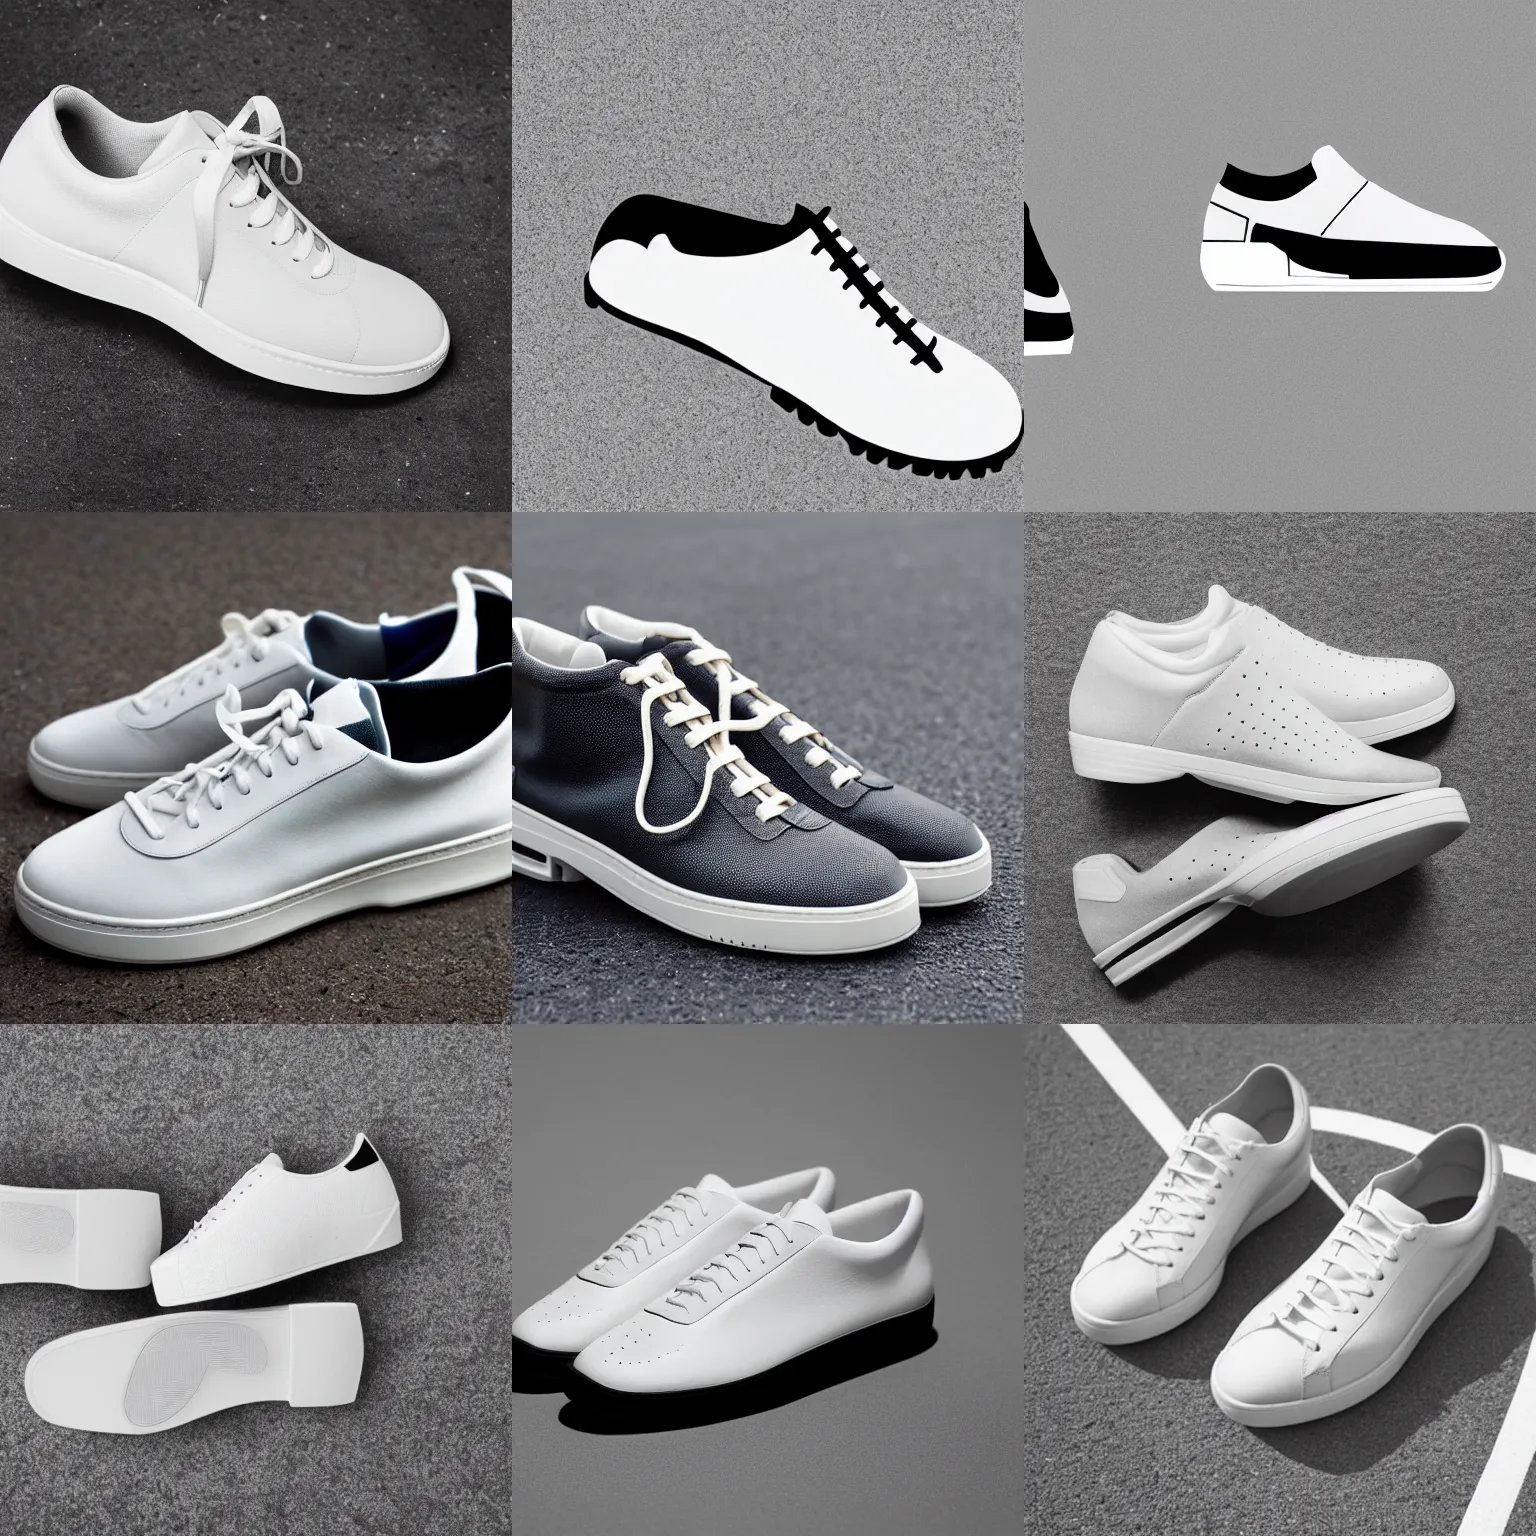 Prompt: dieter rams design principles applied to a sneaker